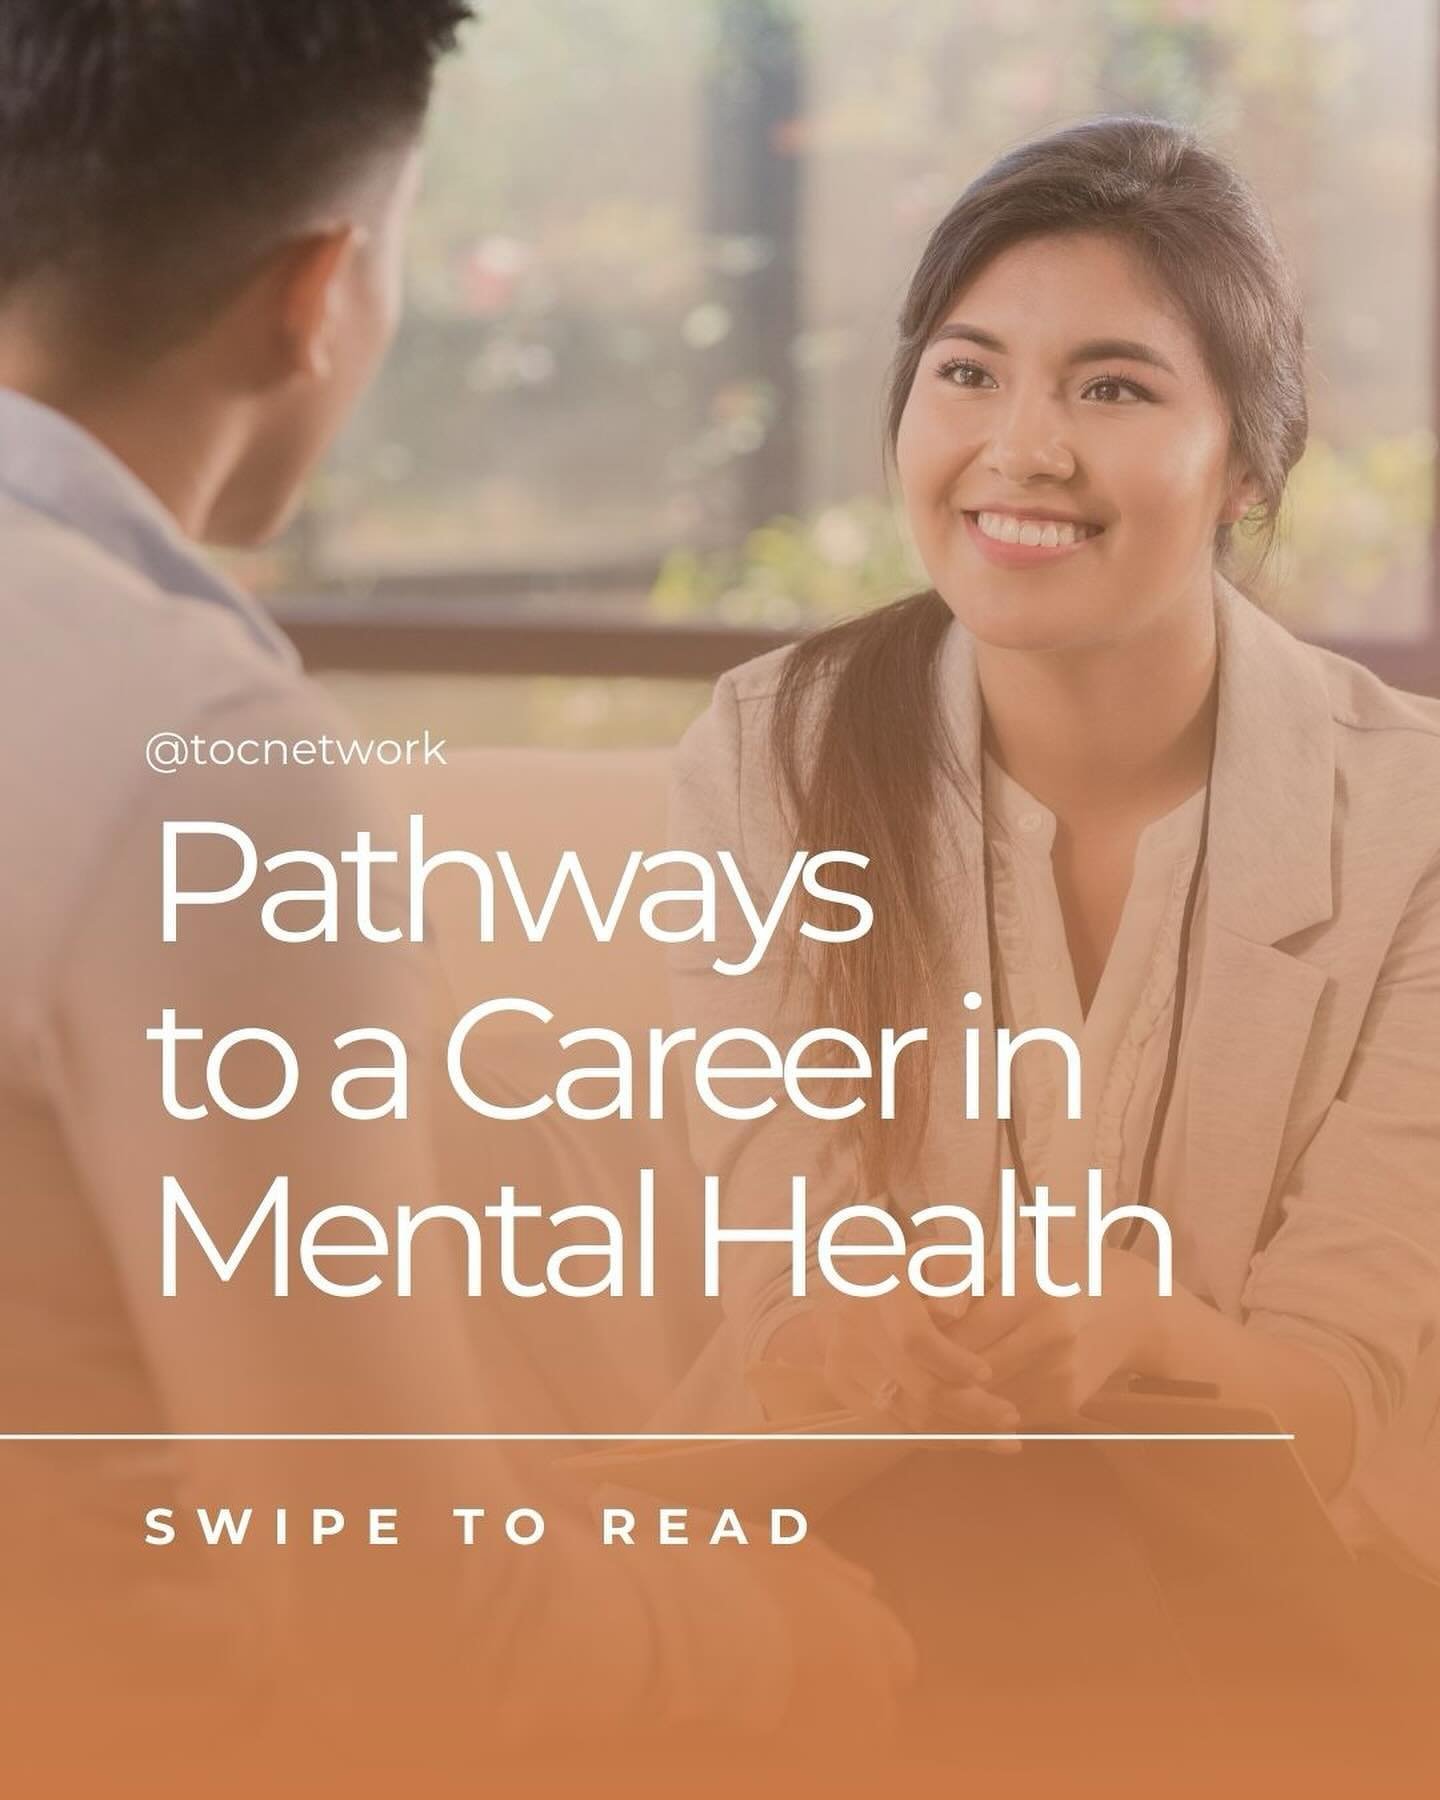 Pathways to a Career in Mental Health 🌟

From counseling to psychiatry, the field of mental health offers a multitude of career avenues to make a difference.

Curious to learn more? Don&rsquo;t miss our upcoming panel discussion featuring BIPOC Ment